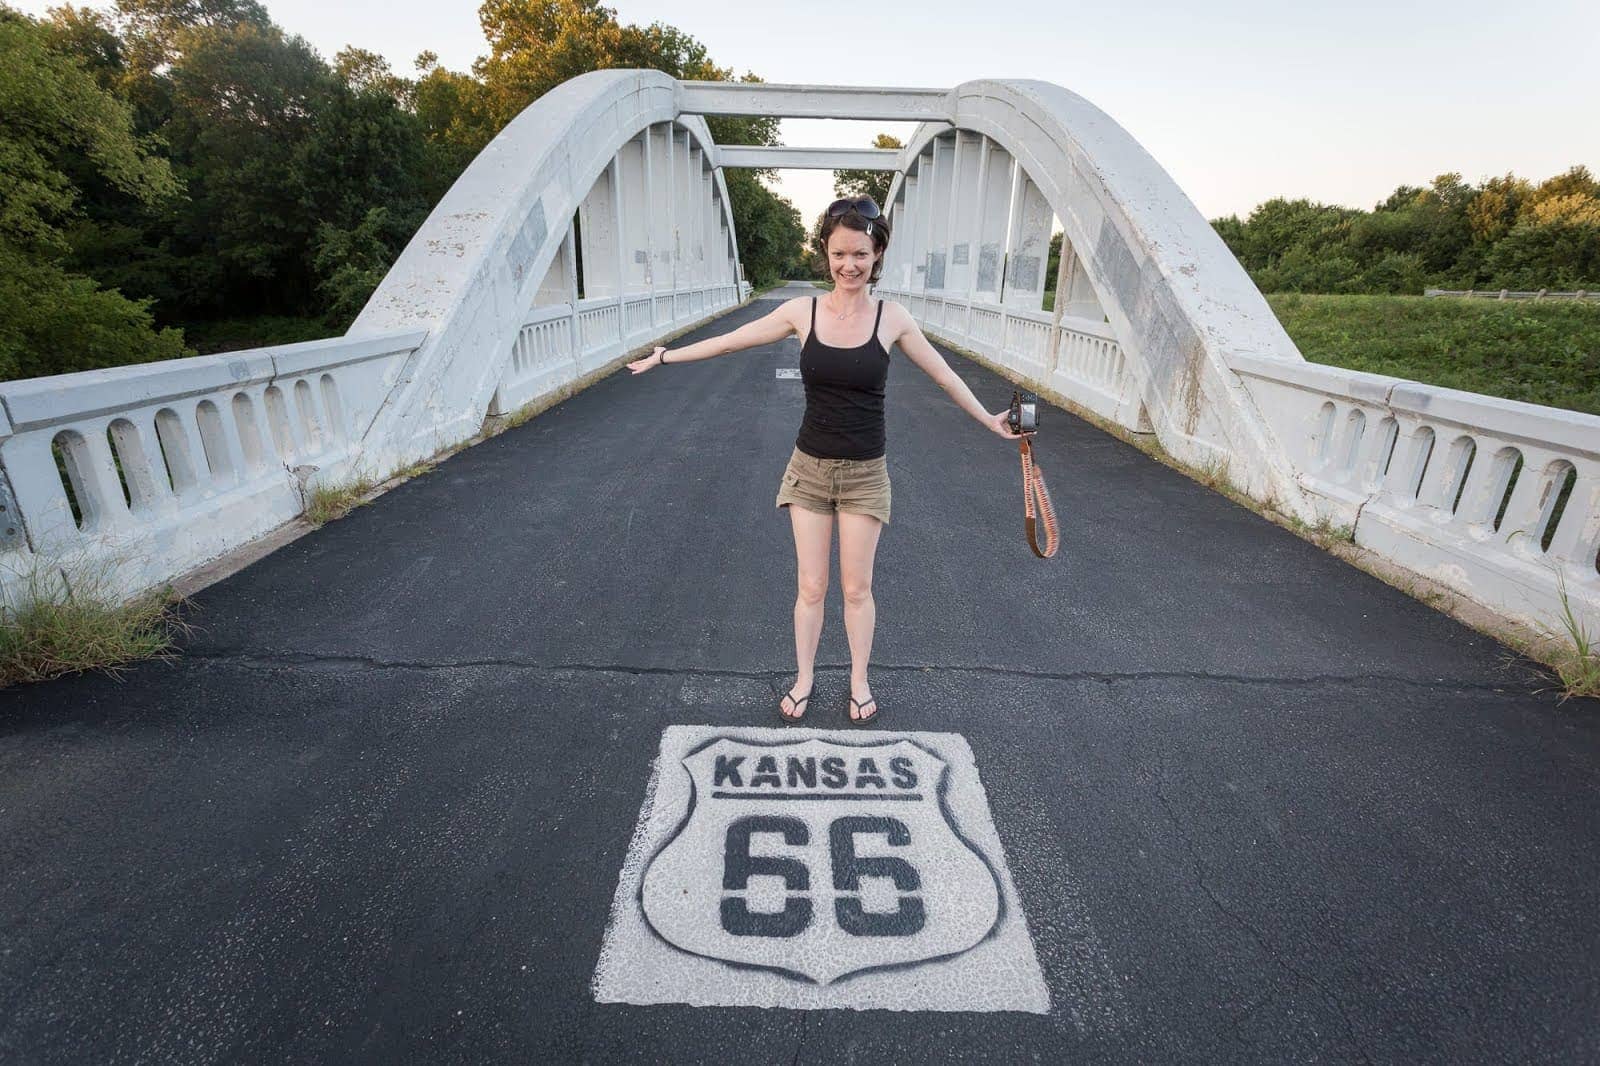 Bridge on route 66 outside Baxter Springs Kansas_by_Laurence Norah